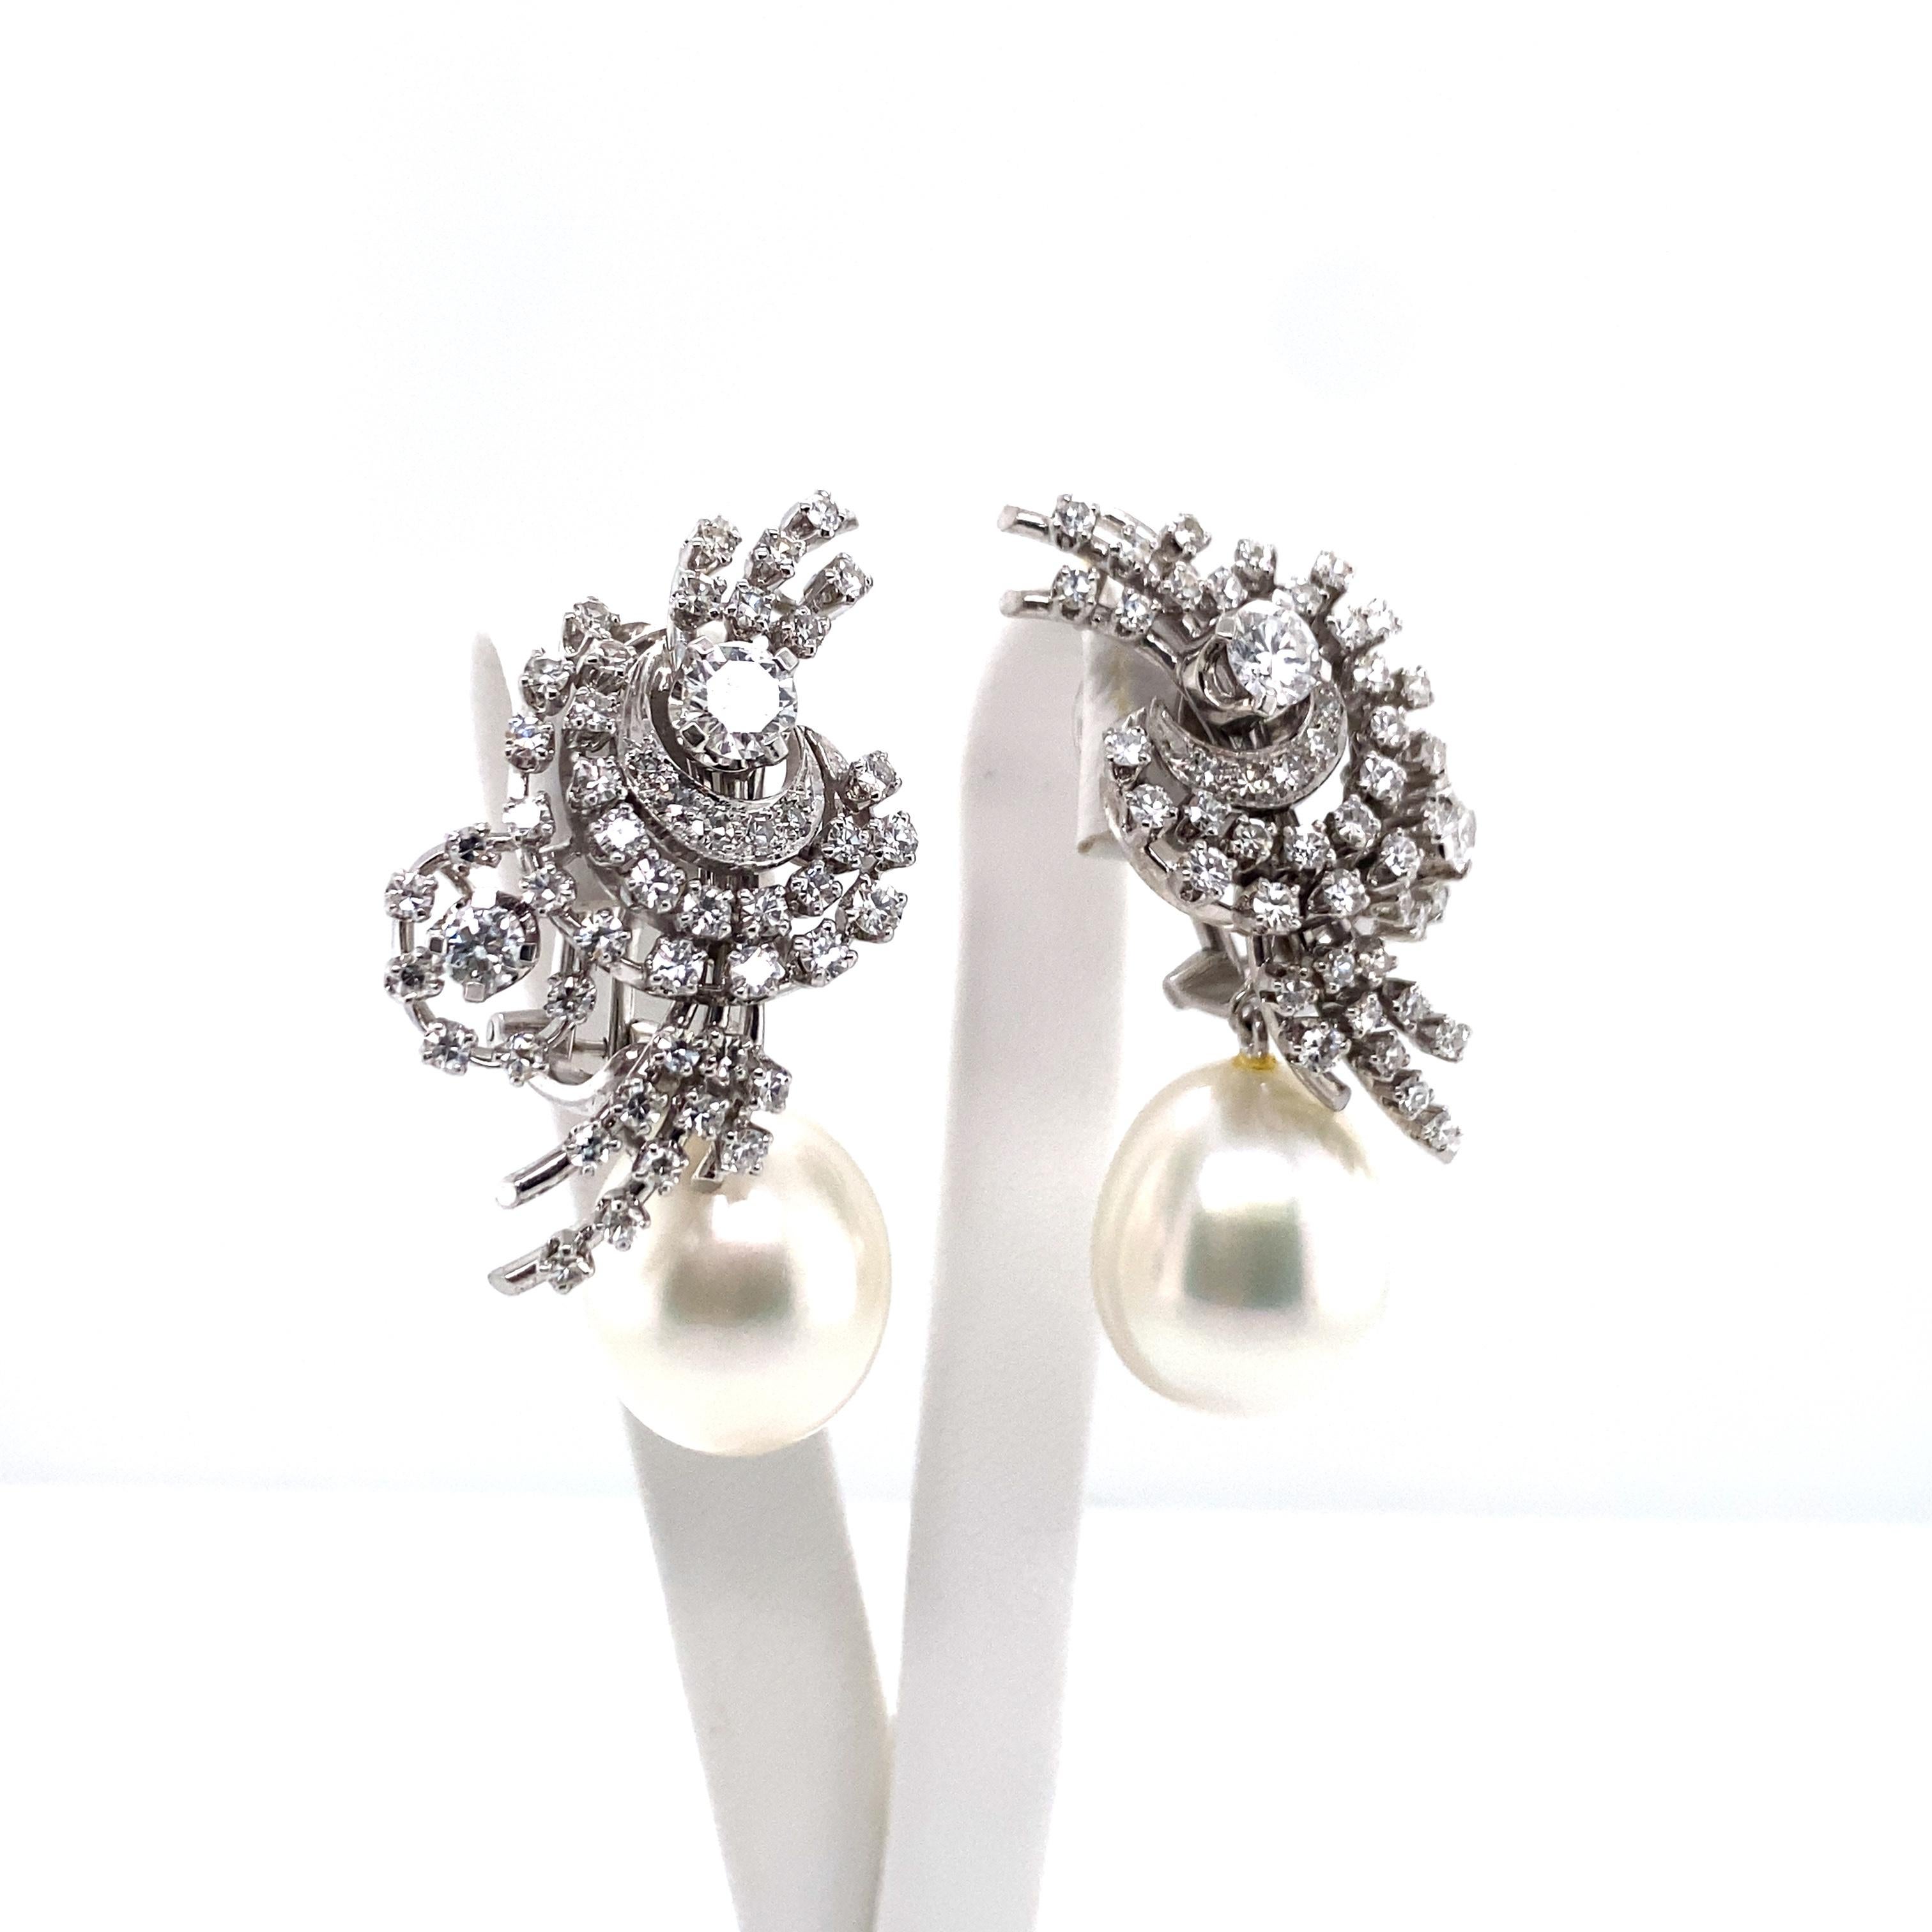 Contemporary South Sea Cultured Pearl and Diamond Earclips by Bucherer in 18 Karat White Gold